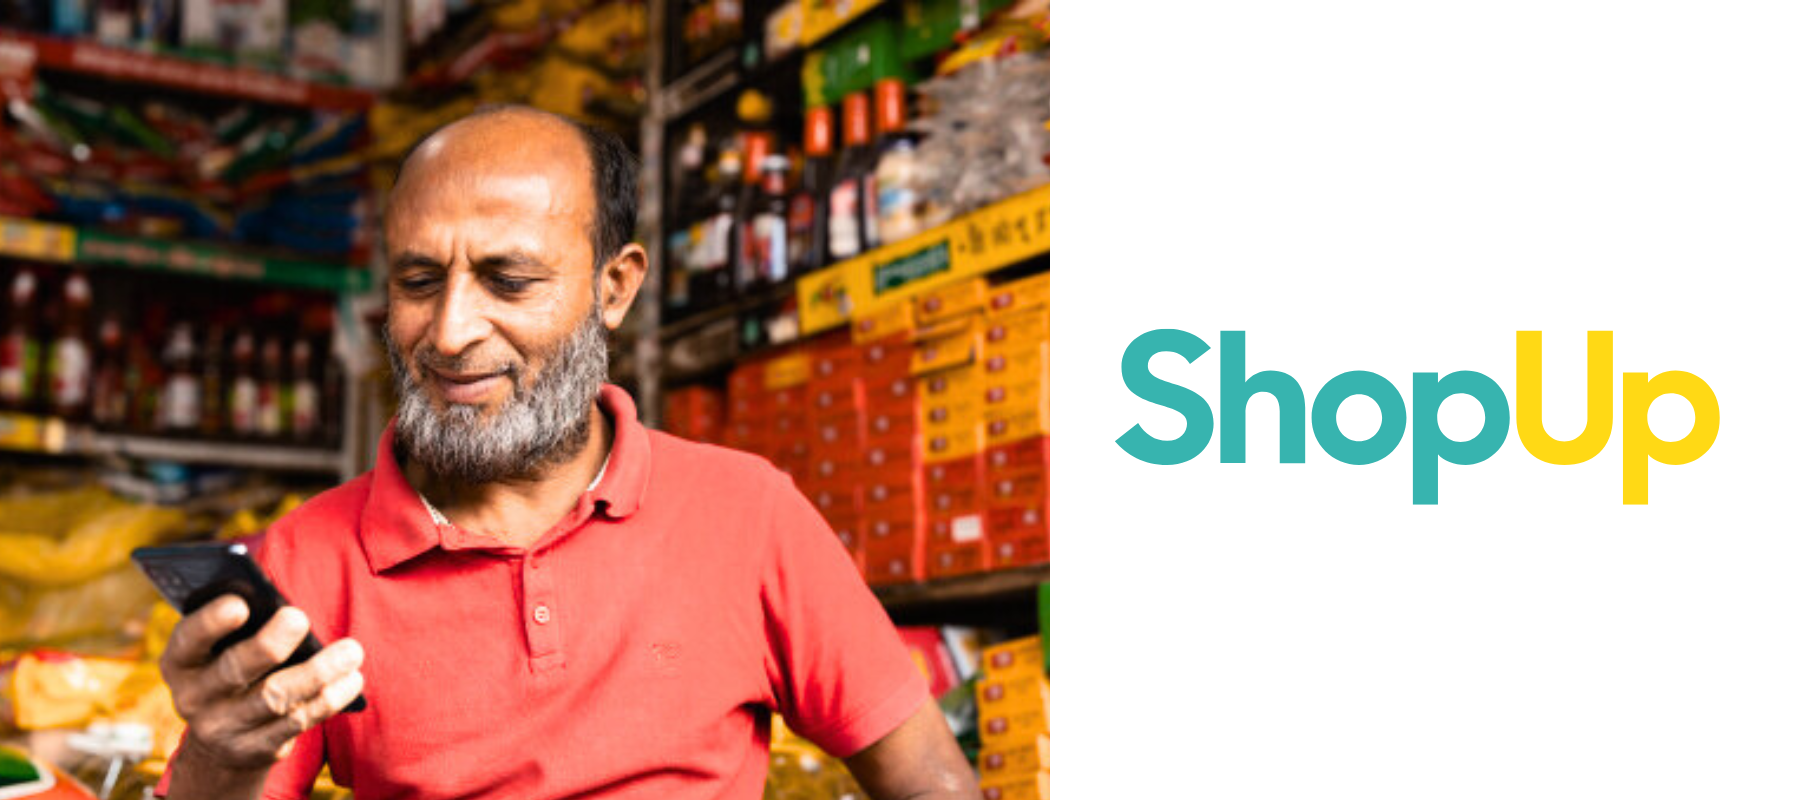 Bangladeshi B2B commerce startup ShopUp announces growth to $129m revenue and strategic expansion plans